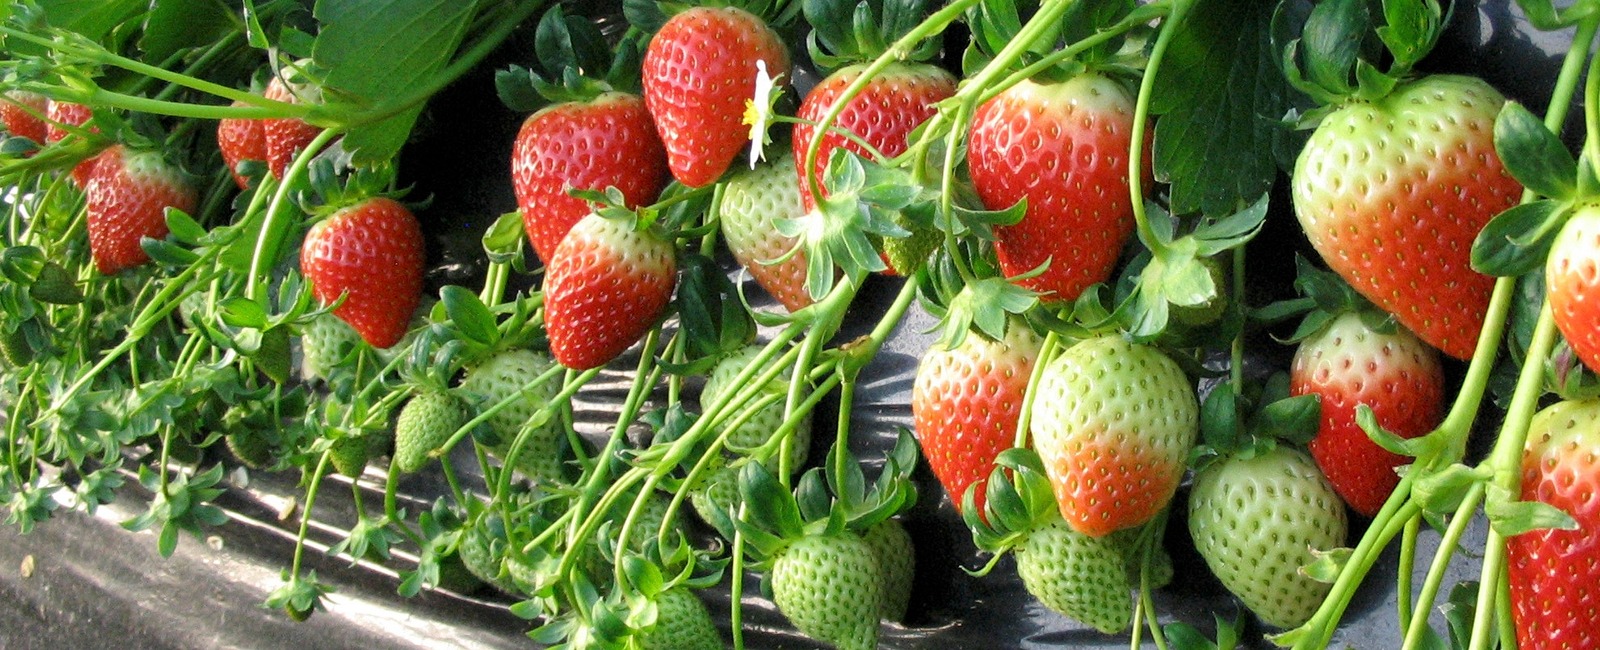 StrawStrawberry soil and water managementberry production systems